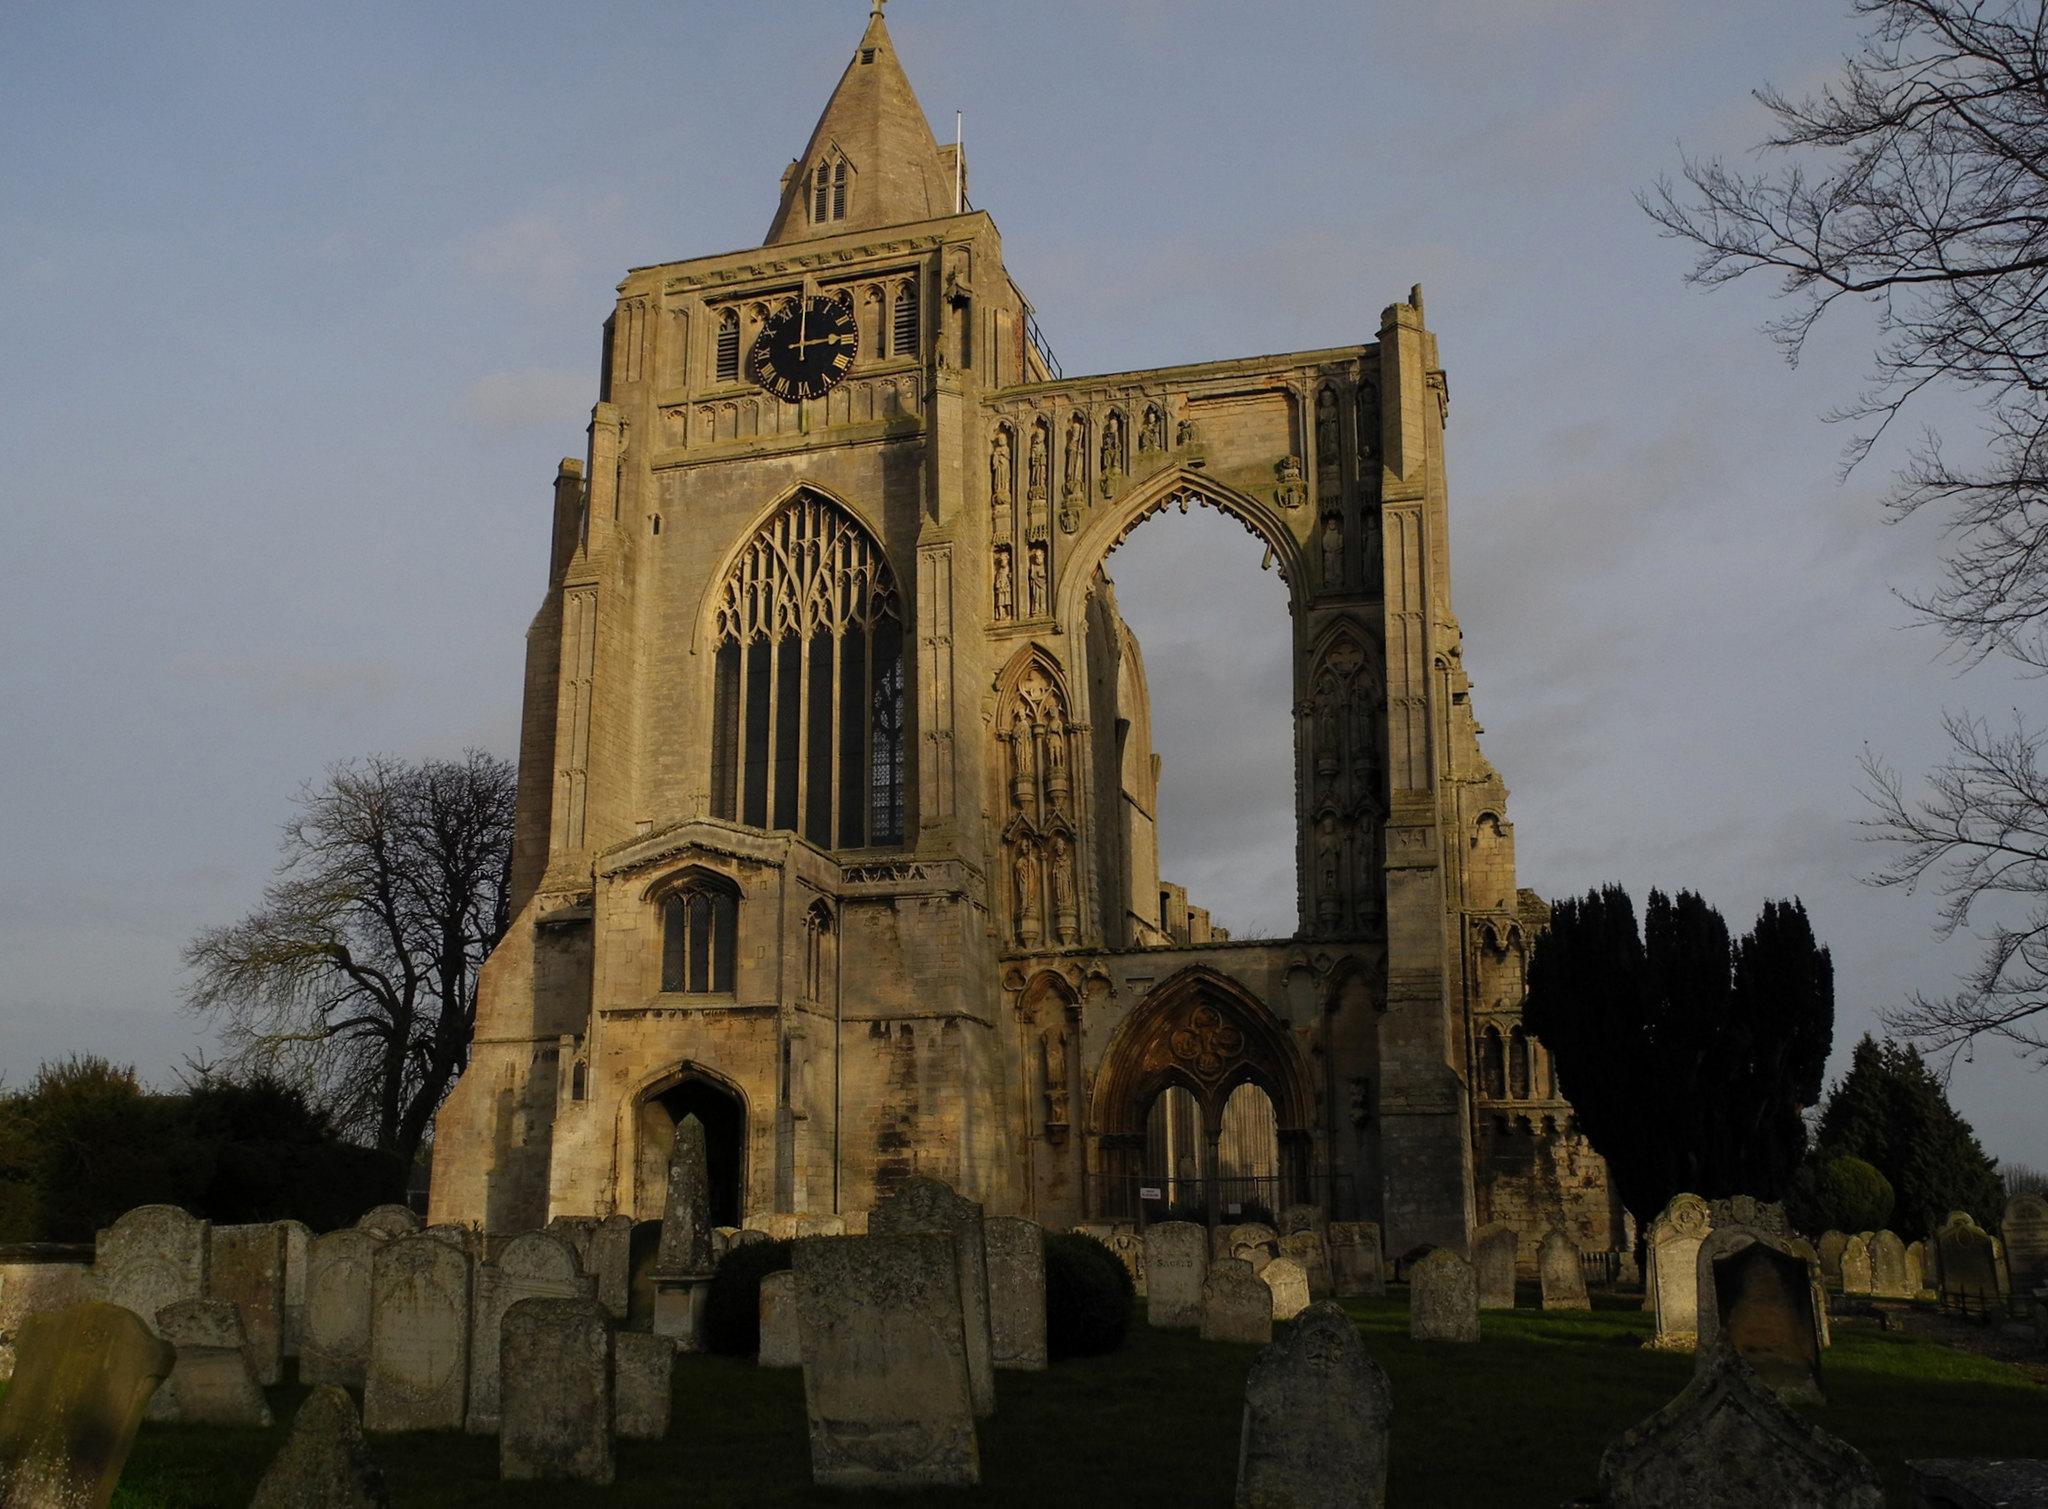 LincolnshireCROWLANDCrowlandAbbey(pamelakellyCC-BY-2.0)1